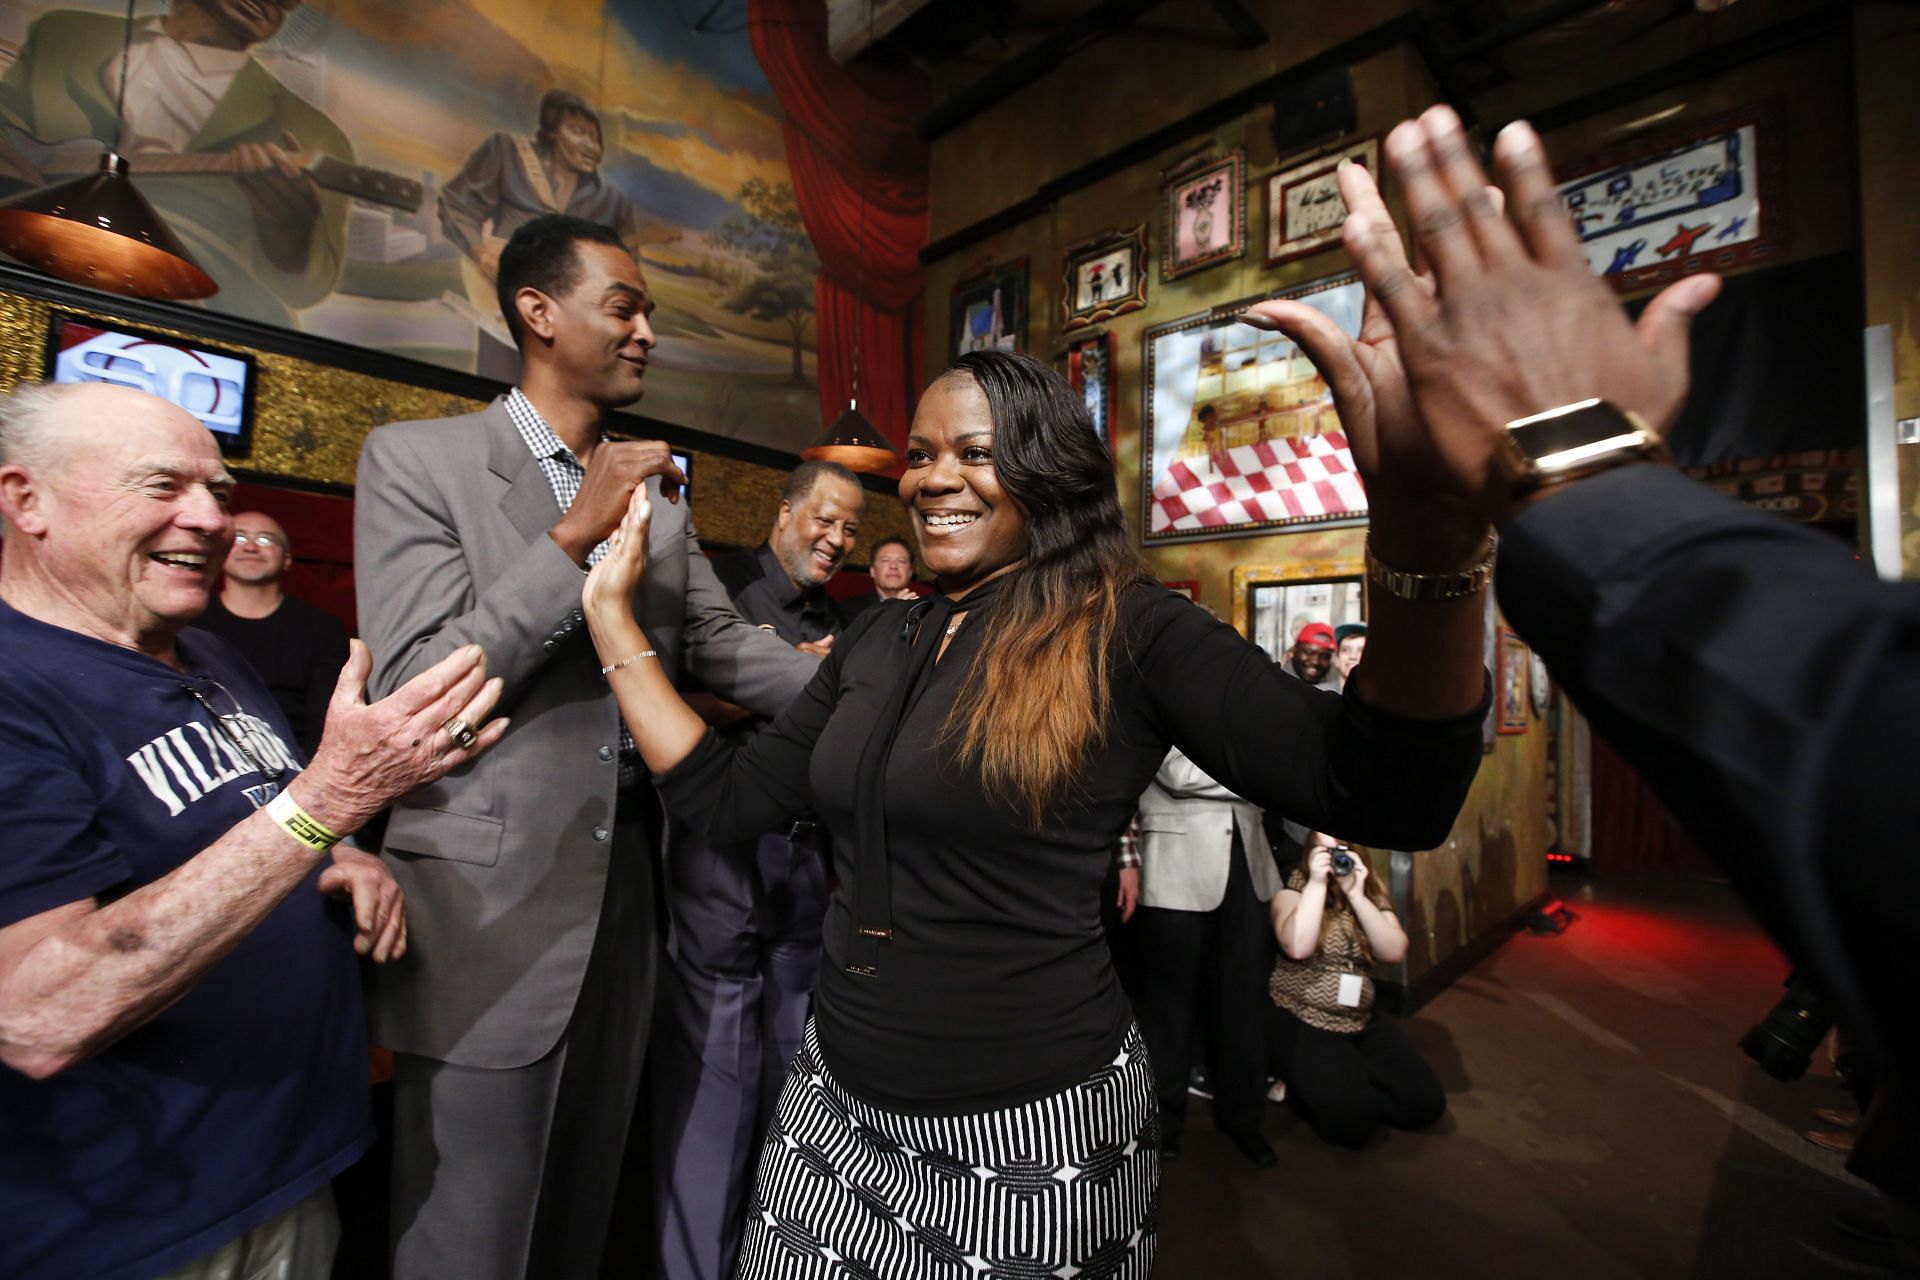 Basketball Hall of Famer Sheryl Swoopes had a legendary game in the 1993 NCAA championship.